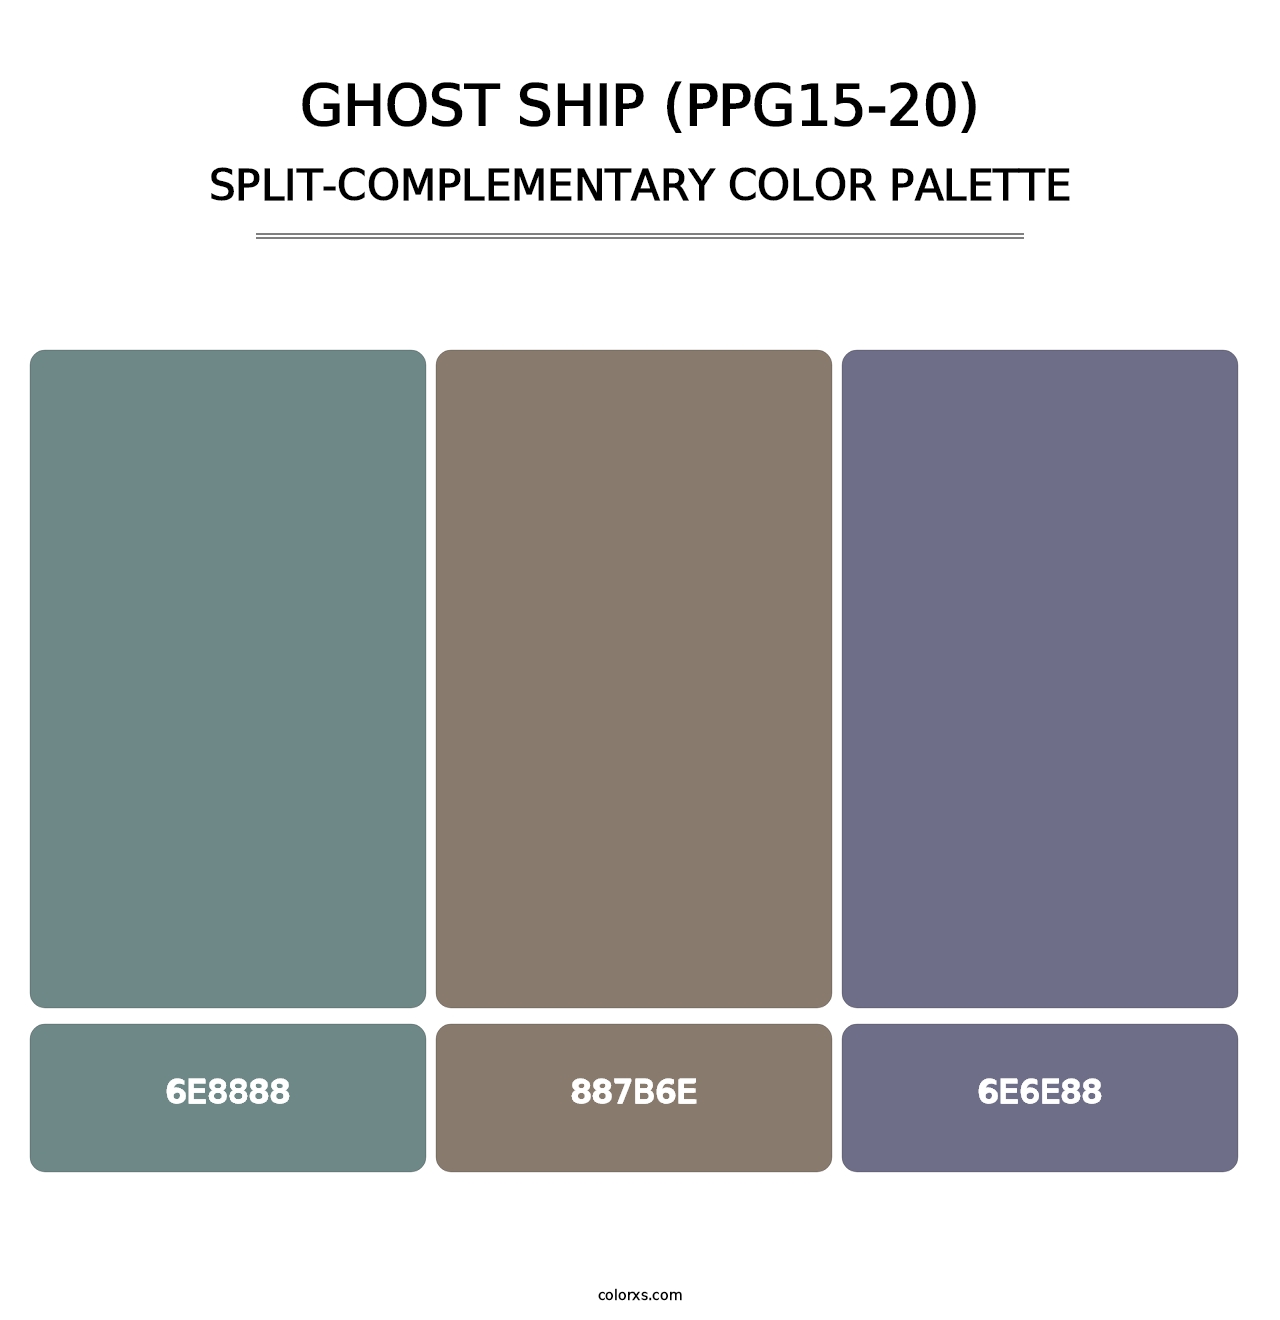 Ghost Ship (PPG15-20) - Split-Complementary Color Palette